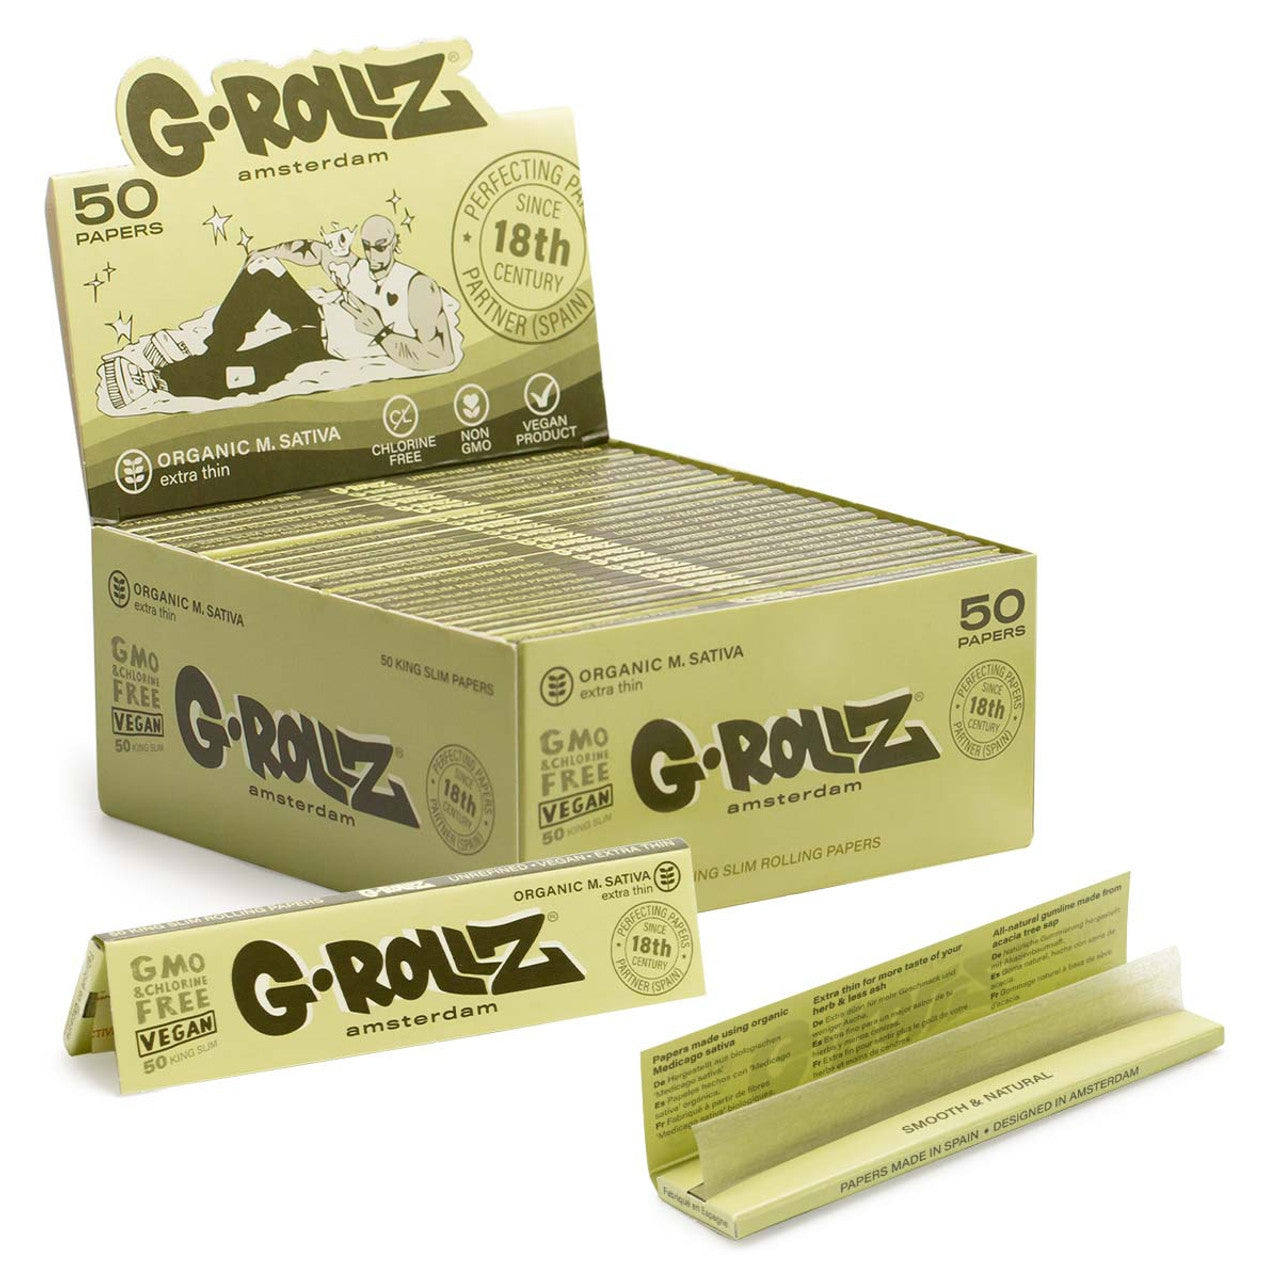 G Rollz Papers - Medicago Sativa Extra Thin (1 1/4 Size)